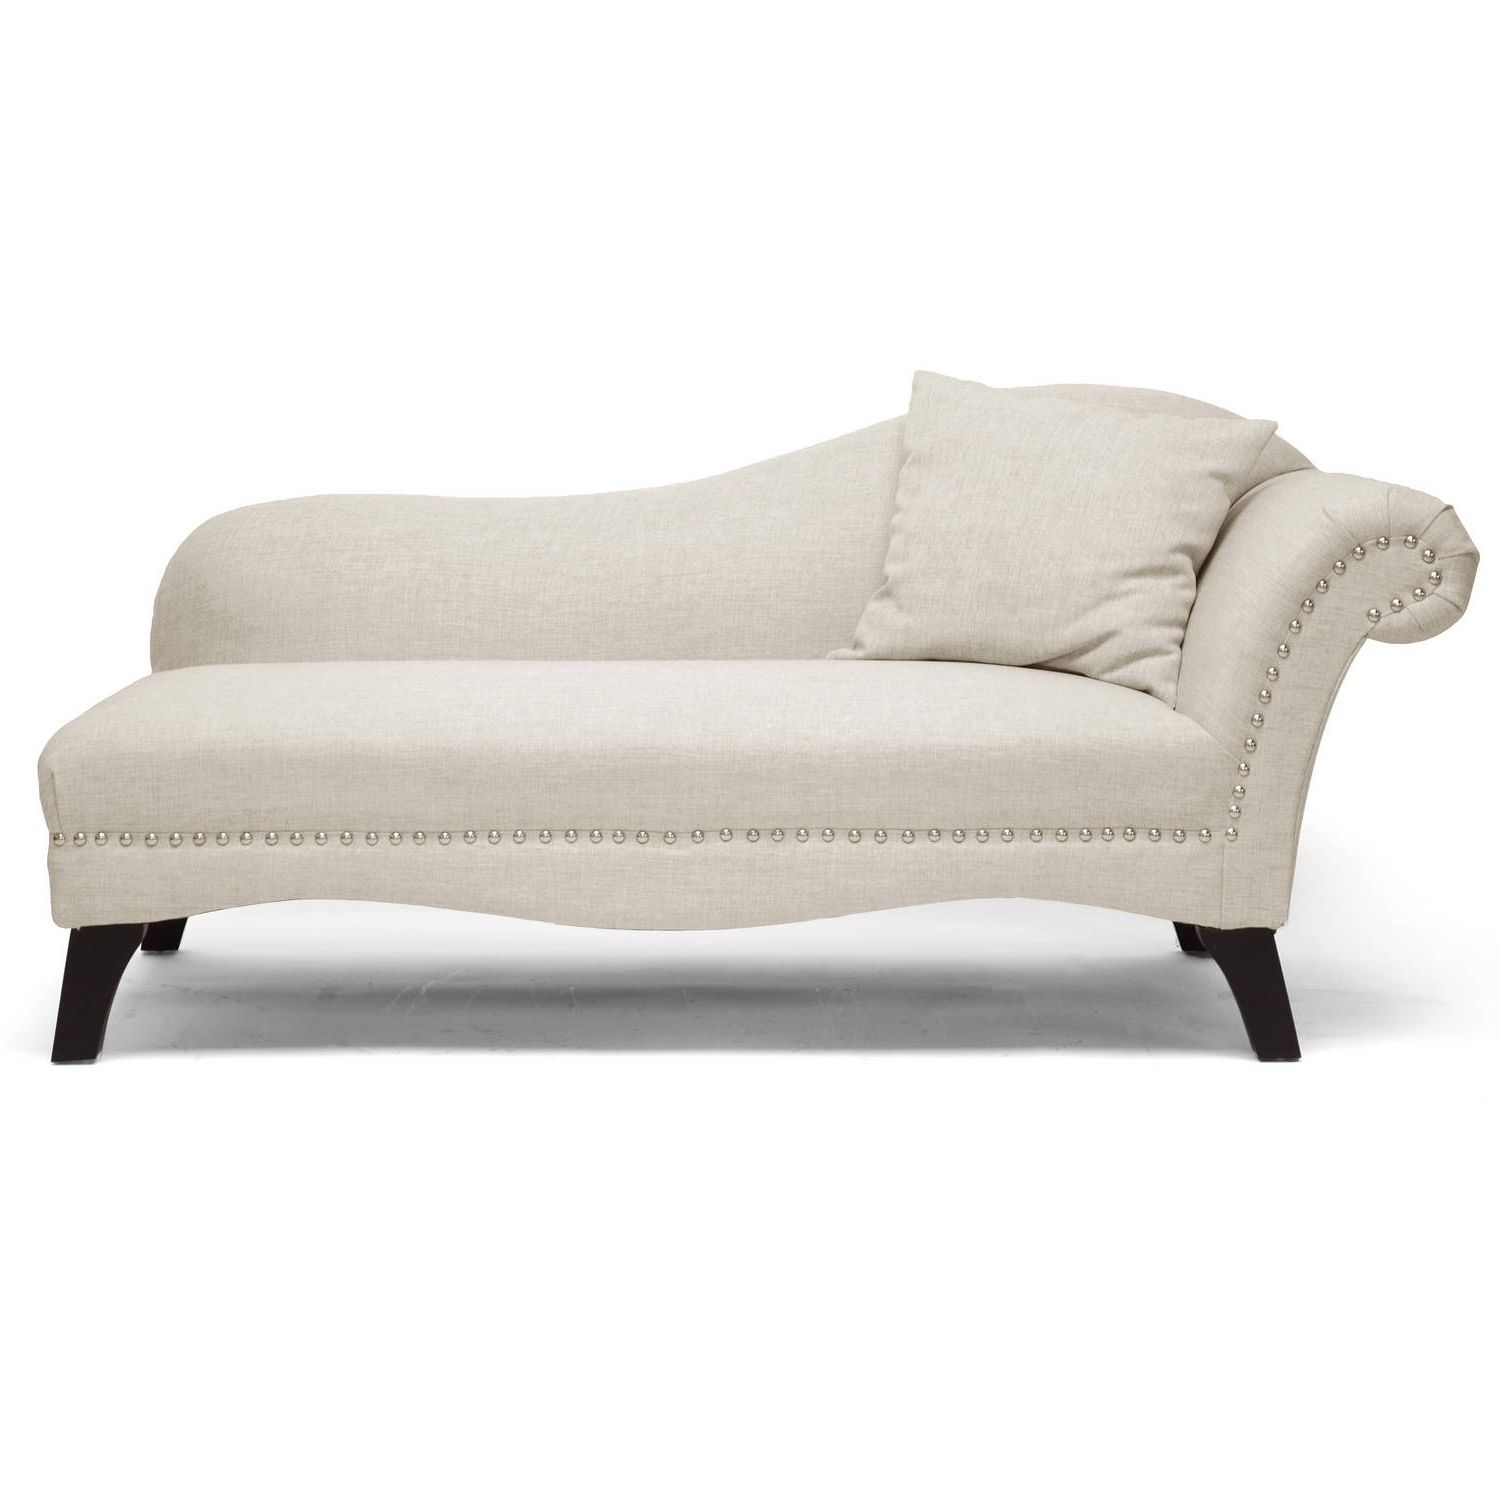 2017 Sofa Chaise Lounges For Chaise Lounges – Walmart (View 2 of 15)